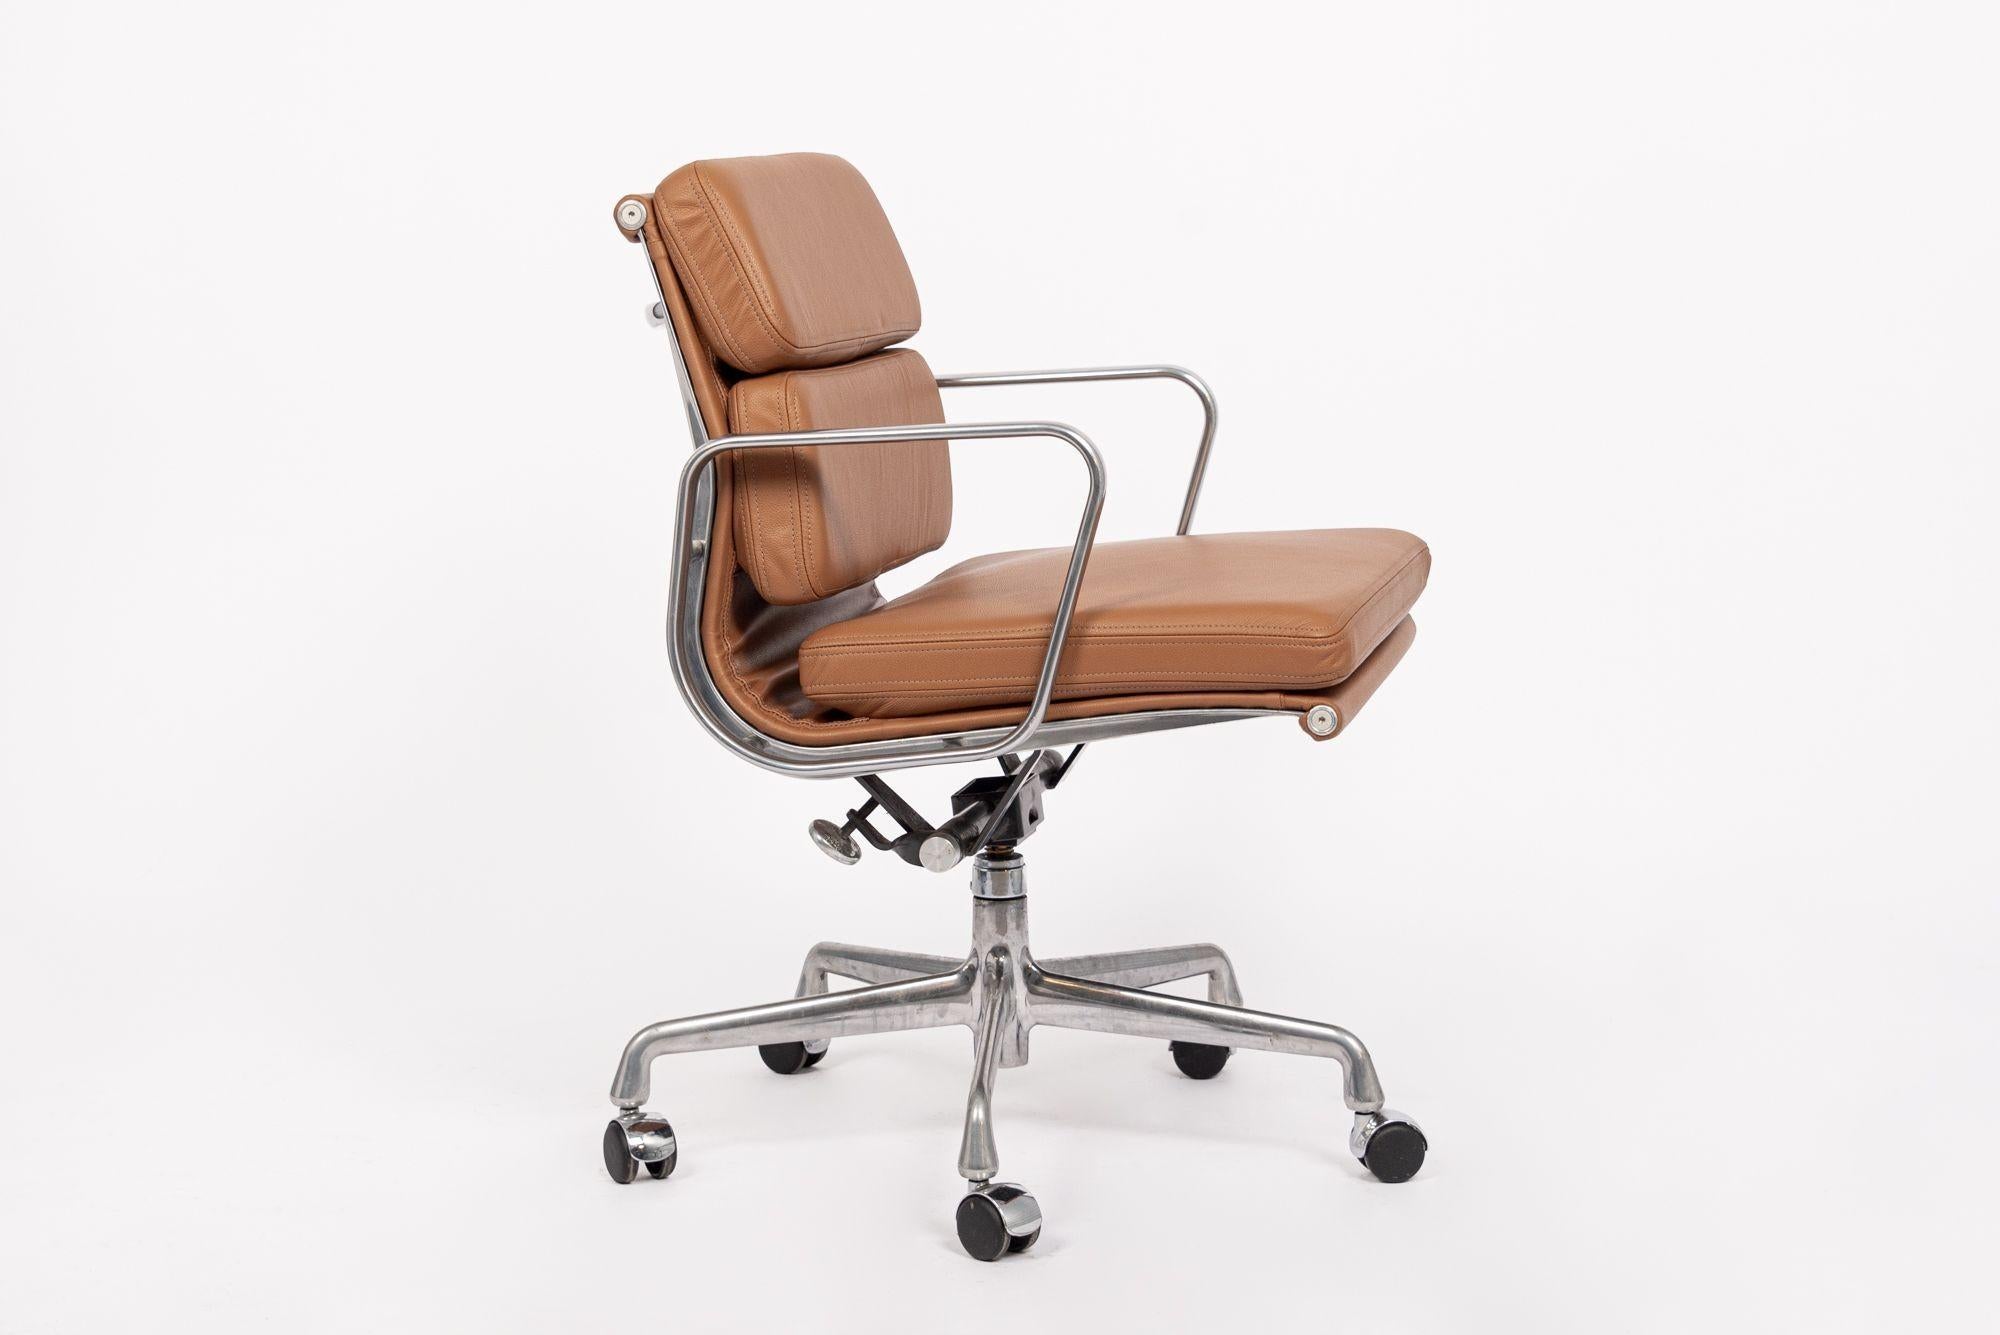 Eames Herman Miller Brown Leather Desk Chair Soft Pad 2000s For Sale 1